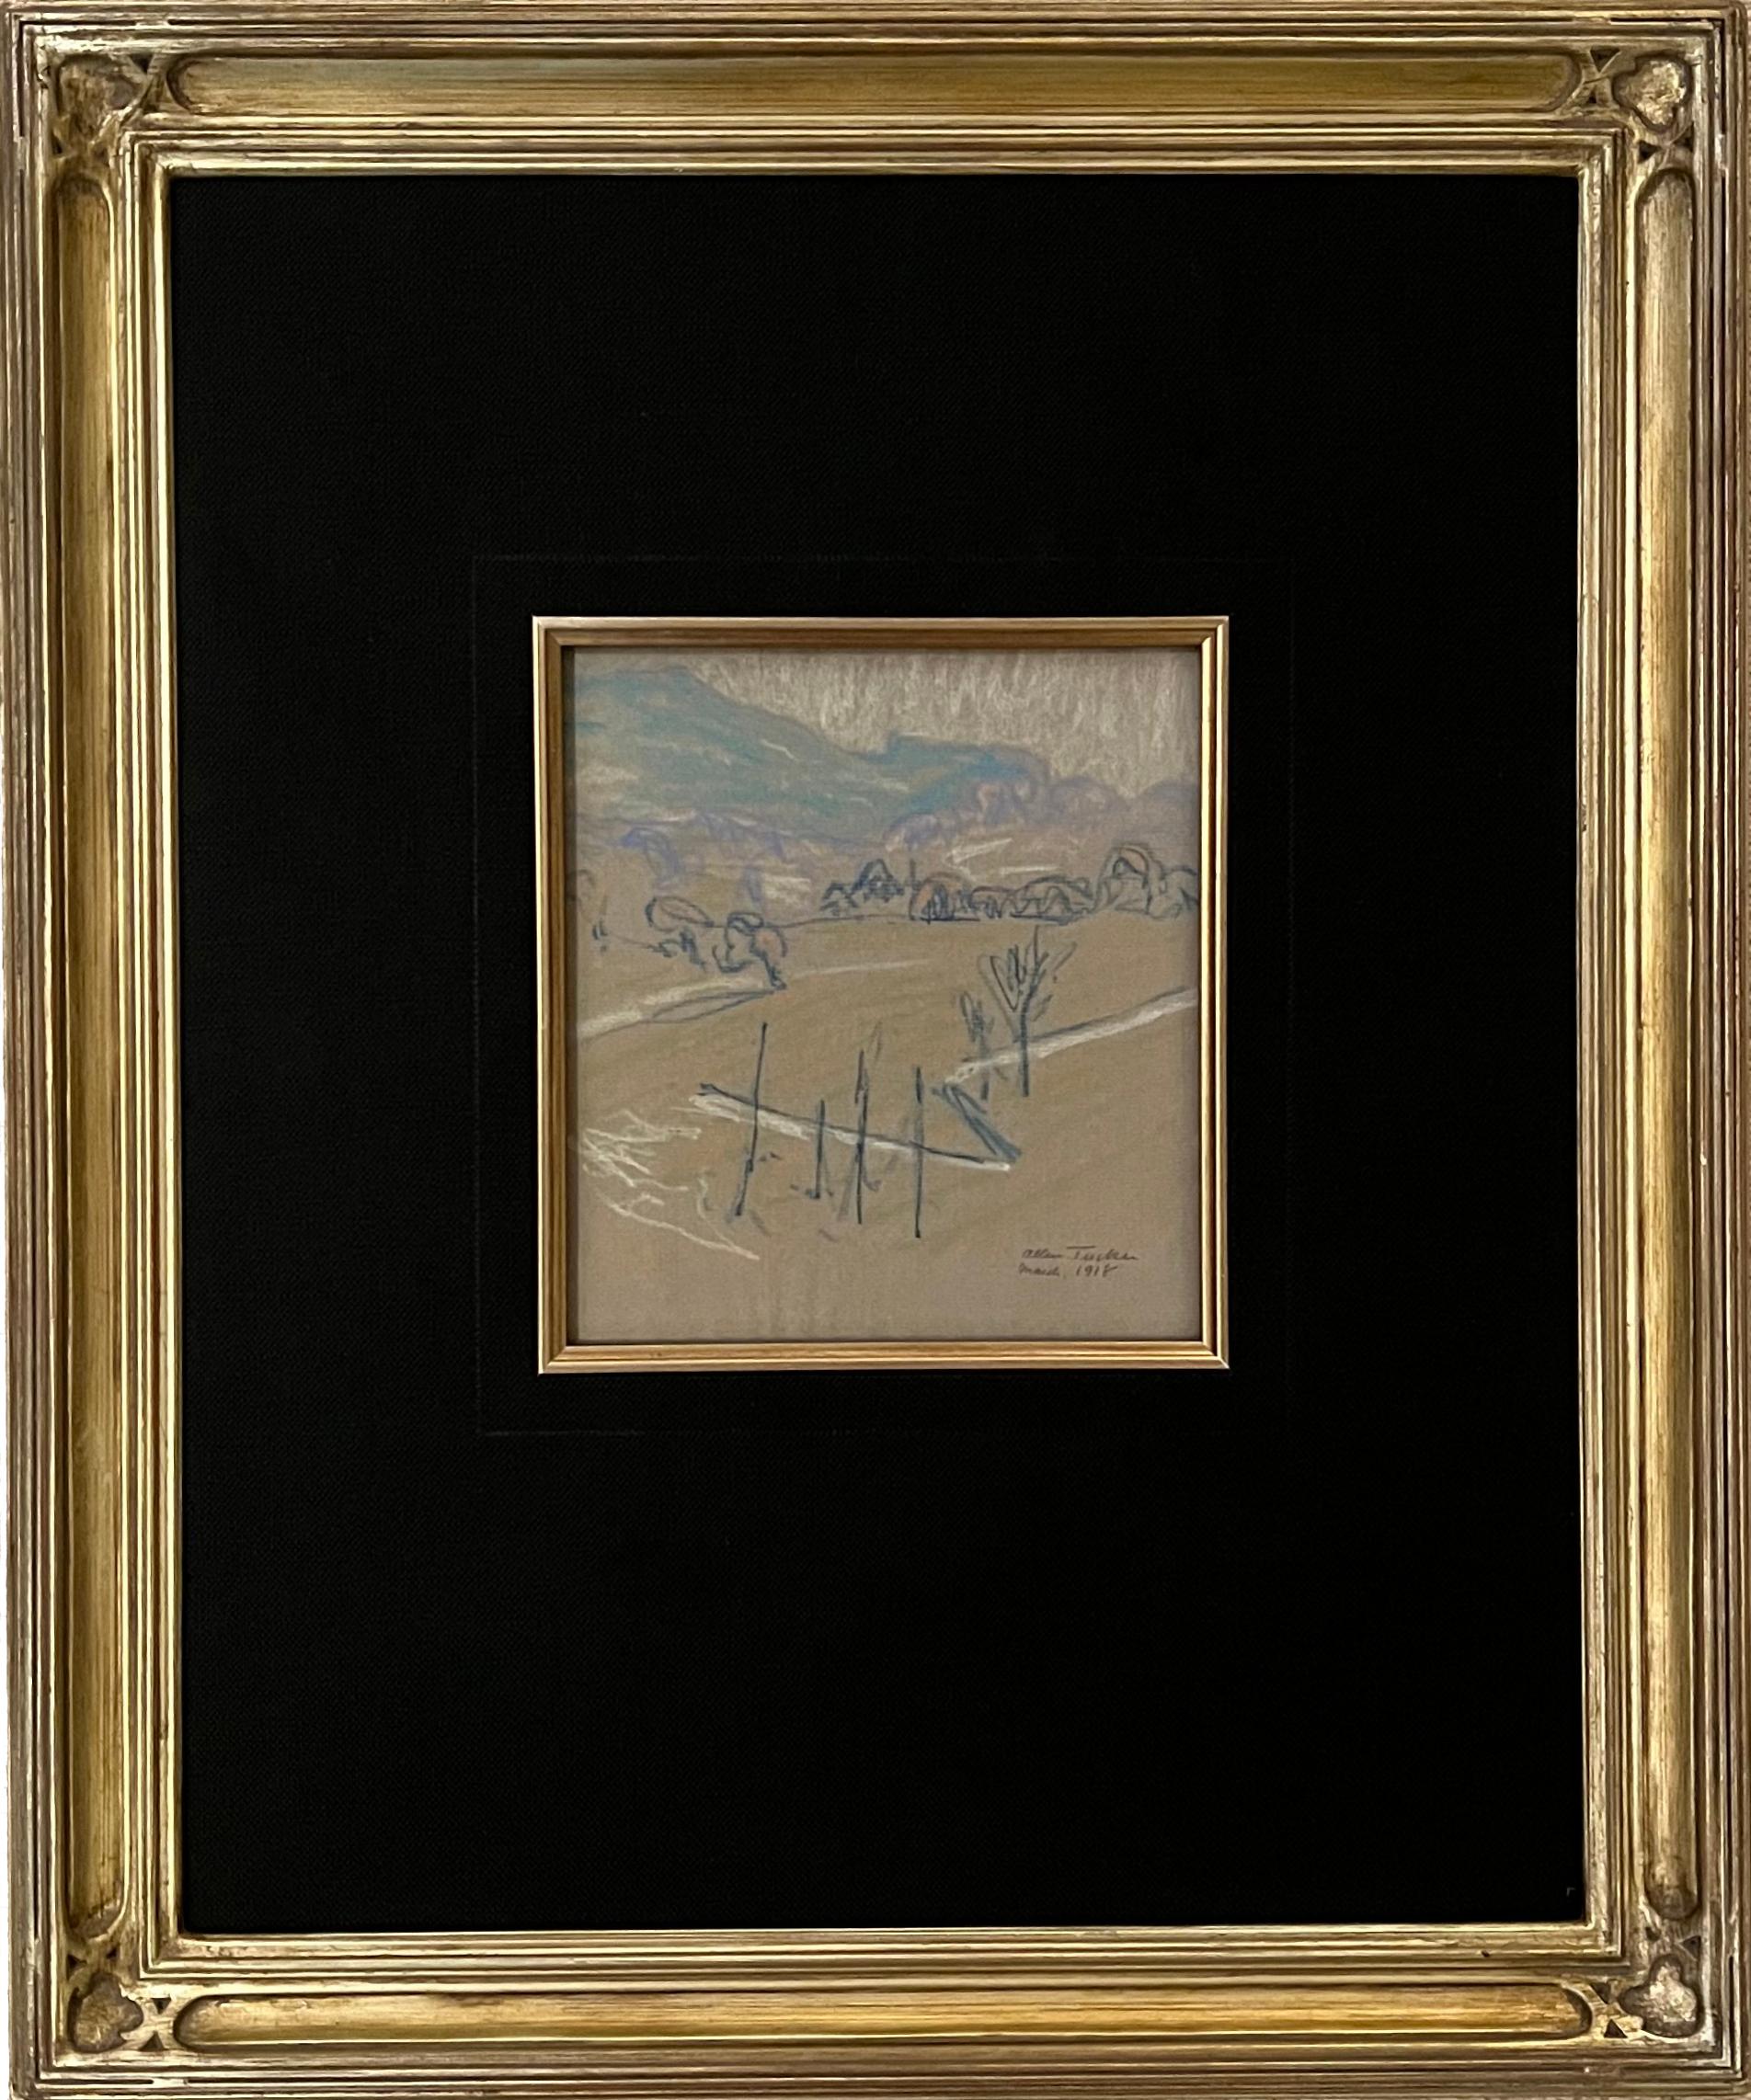 Hillside (1918)
Pastel on grey paper
8 ½"x7 ¾"
23 ½" x 19 ½" x 1 ½"
signed "Allen Tucker March 1918" lower right.

Provenance: Gift from the artist to his friend Una Brage, USA/Switzerland, in the 1930s.
Estate of Ms. Brage to her friend Jean